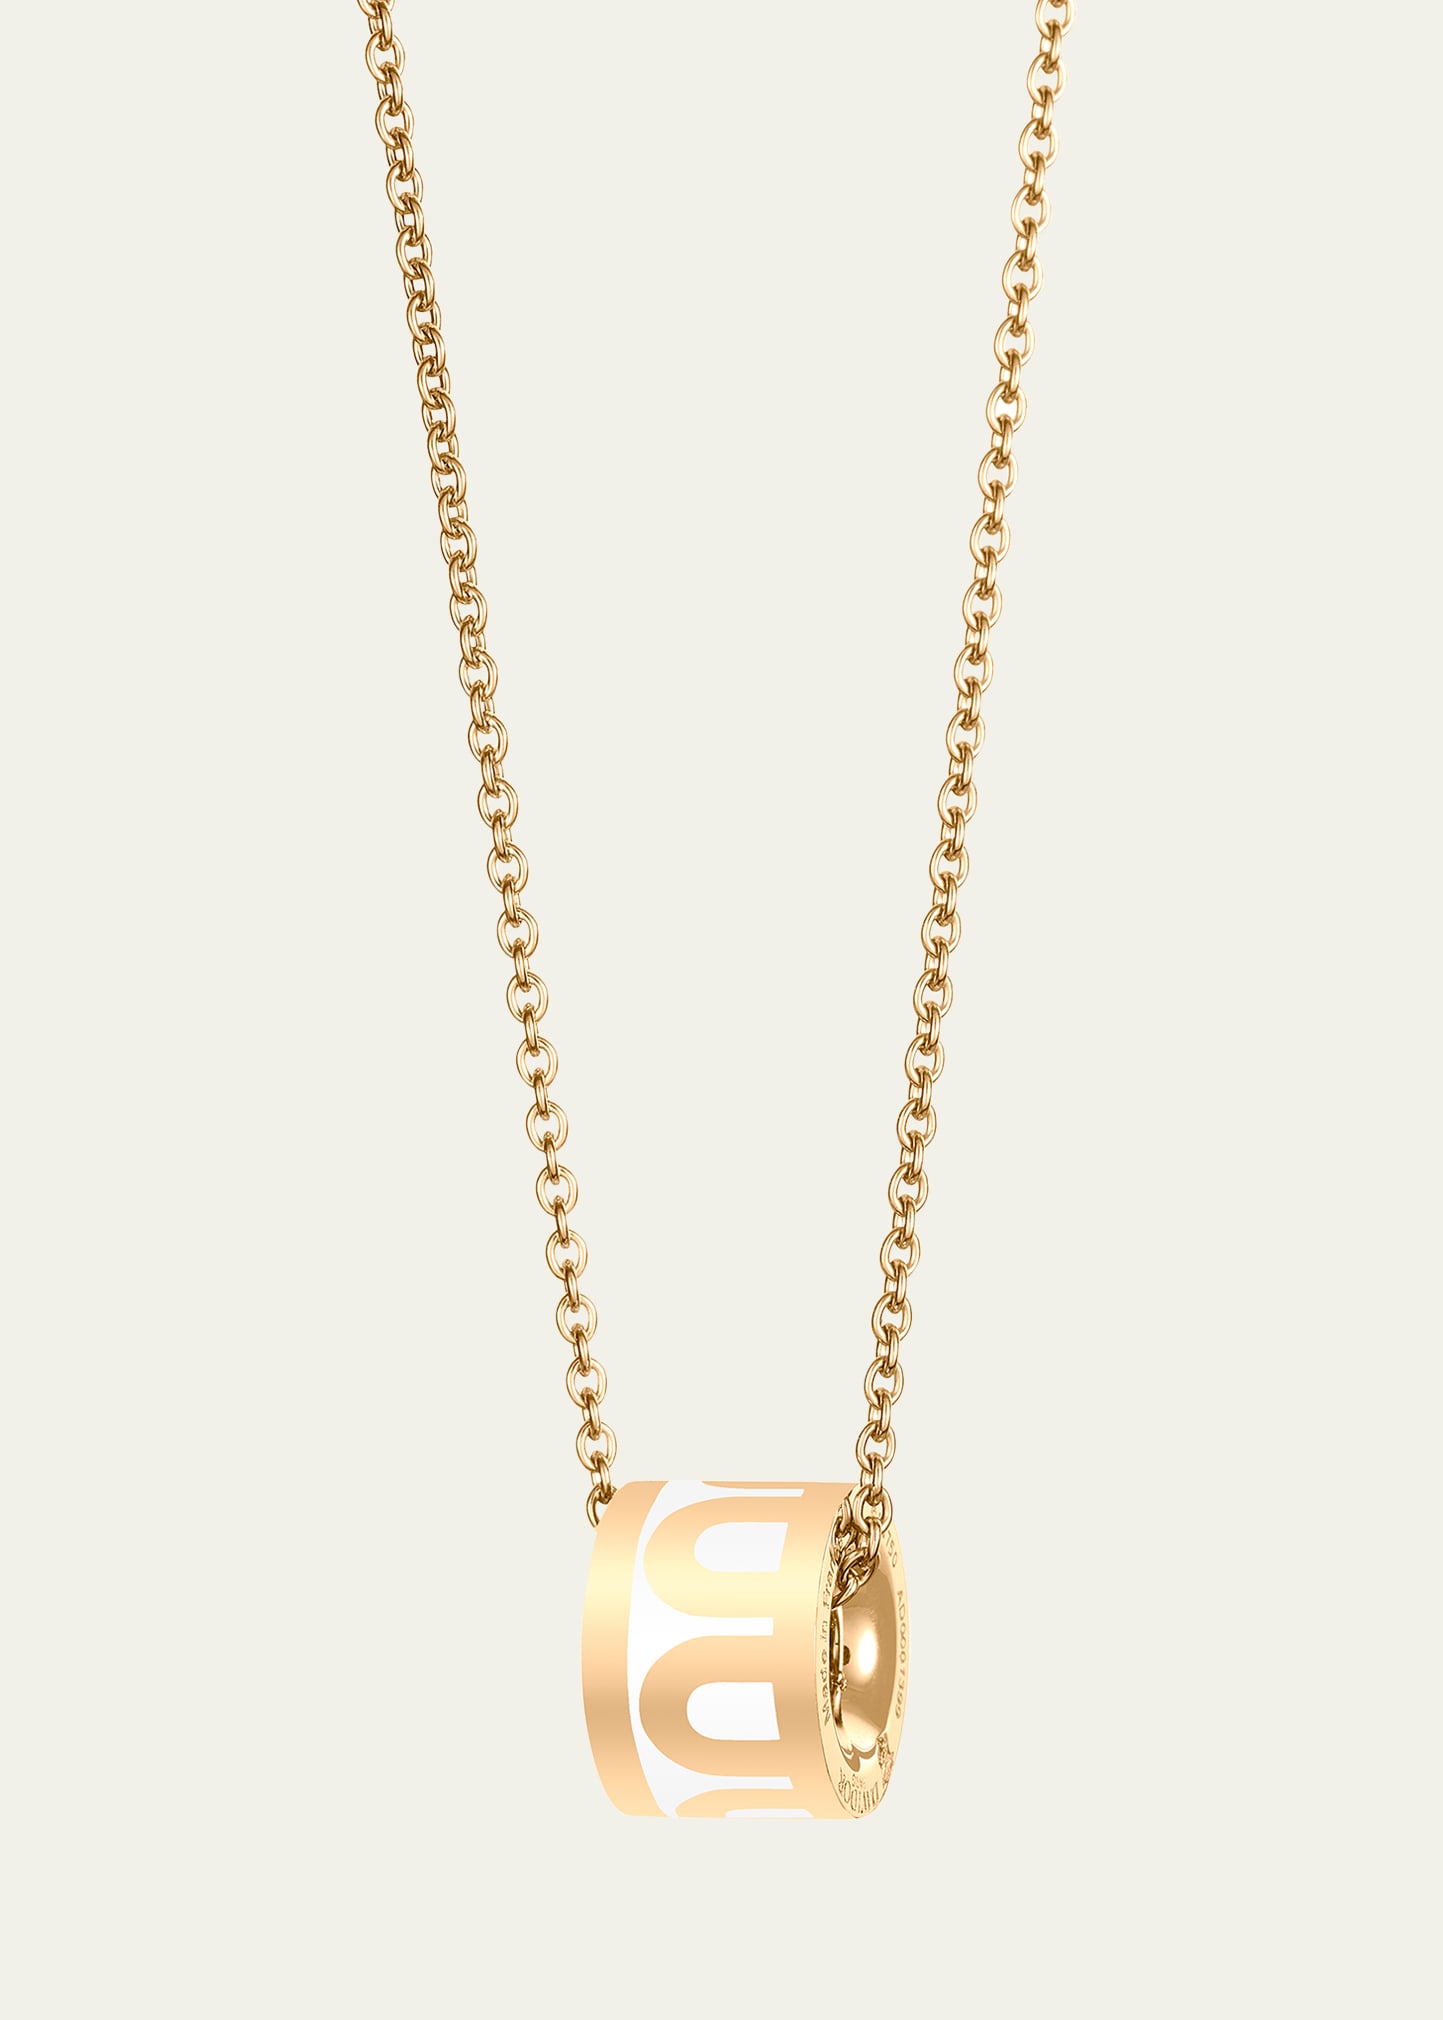 L'Arc de DAVIDOR Bead Necklace in 18K Yellow Gold with Neige Lacquered Ceramic